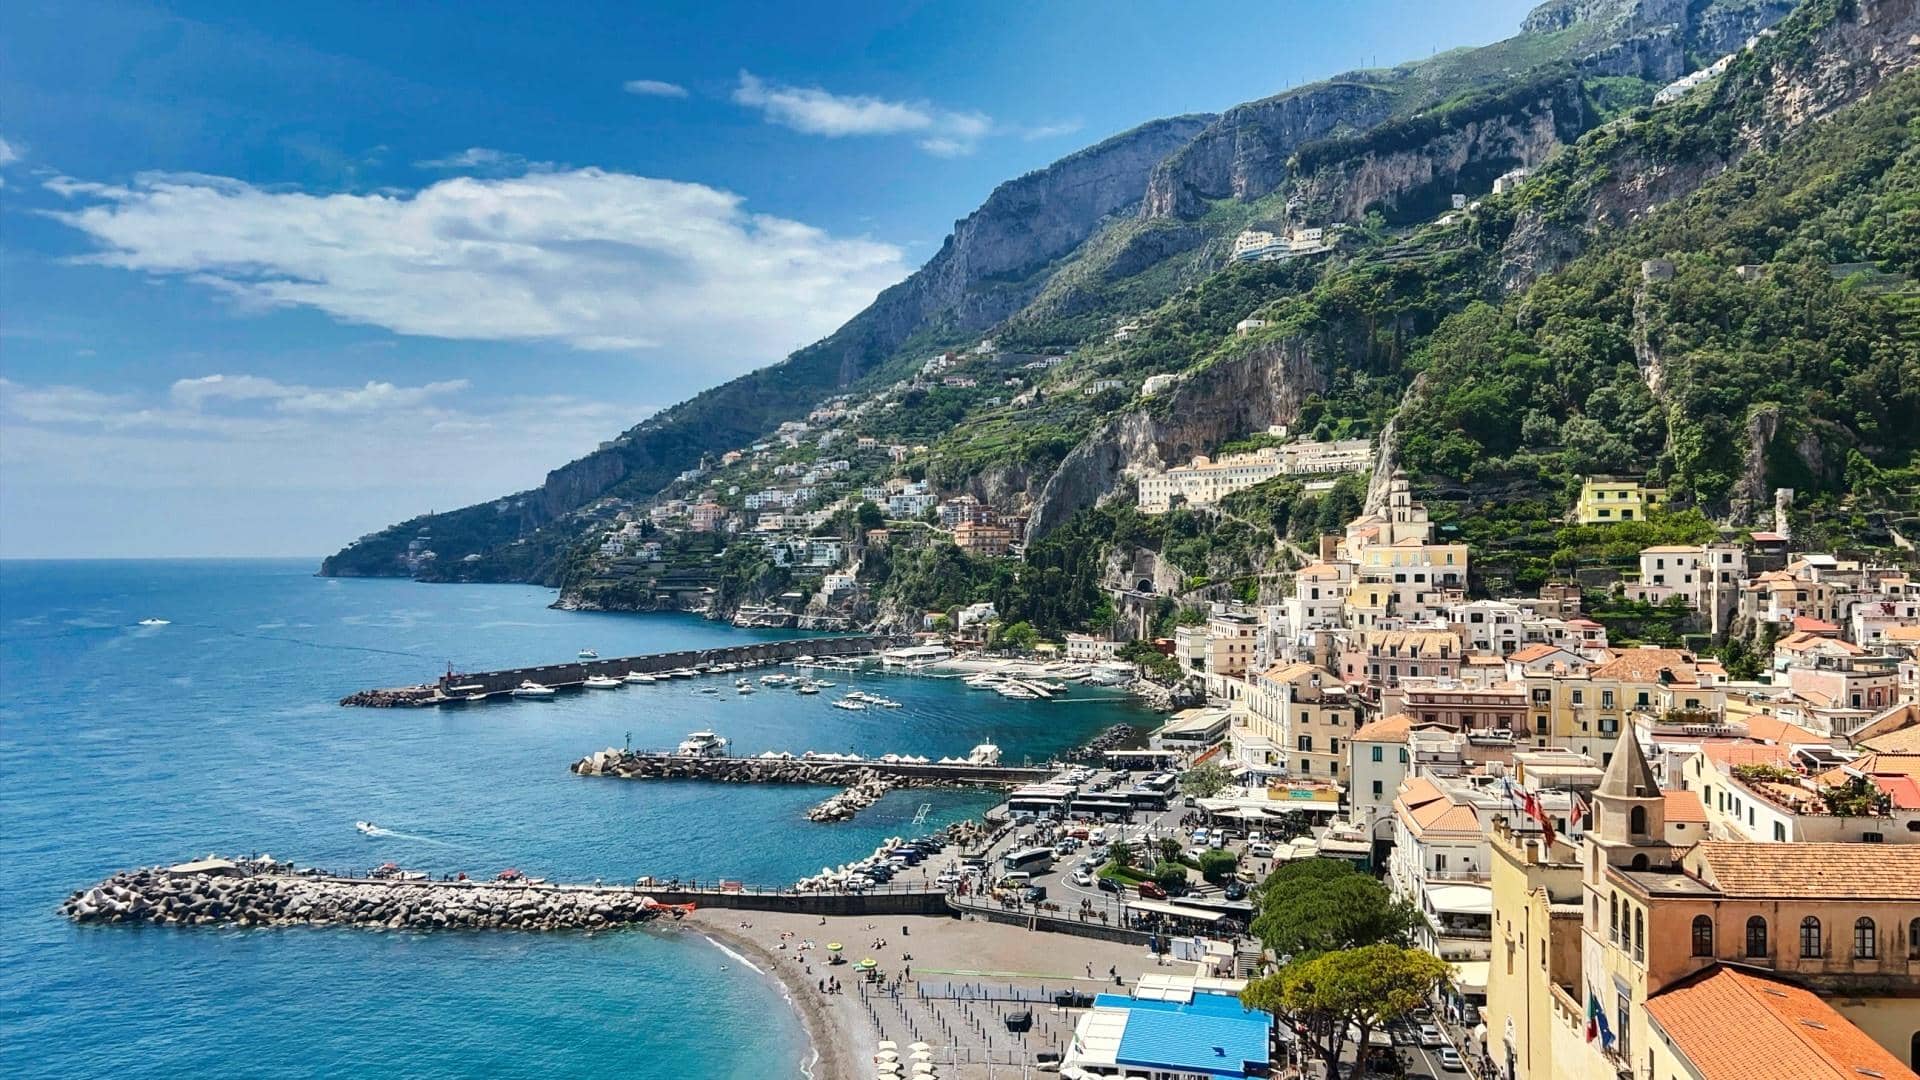 Amalfi Italy was once a major port, so some lazy Italians named the entire coast after it.